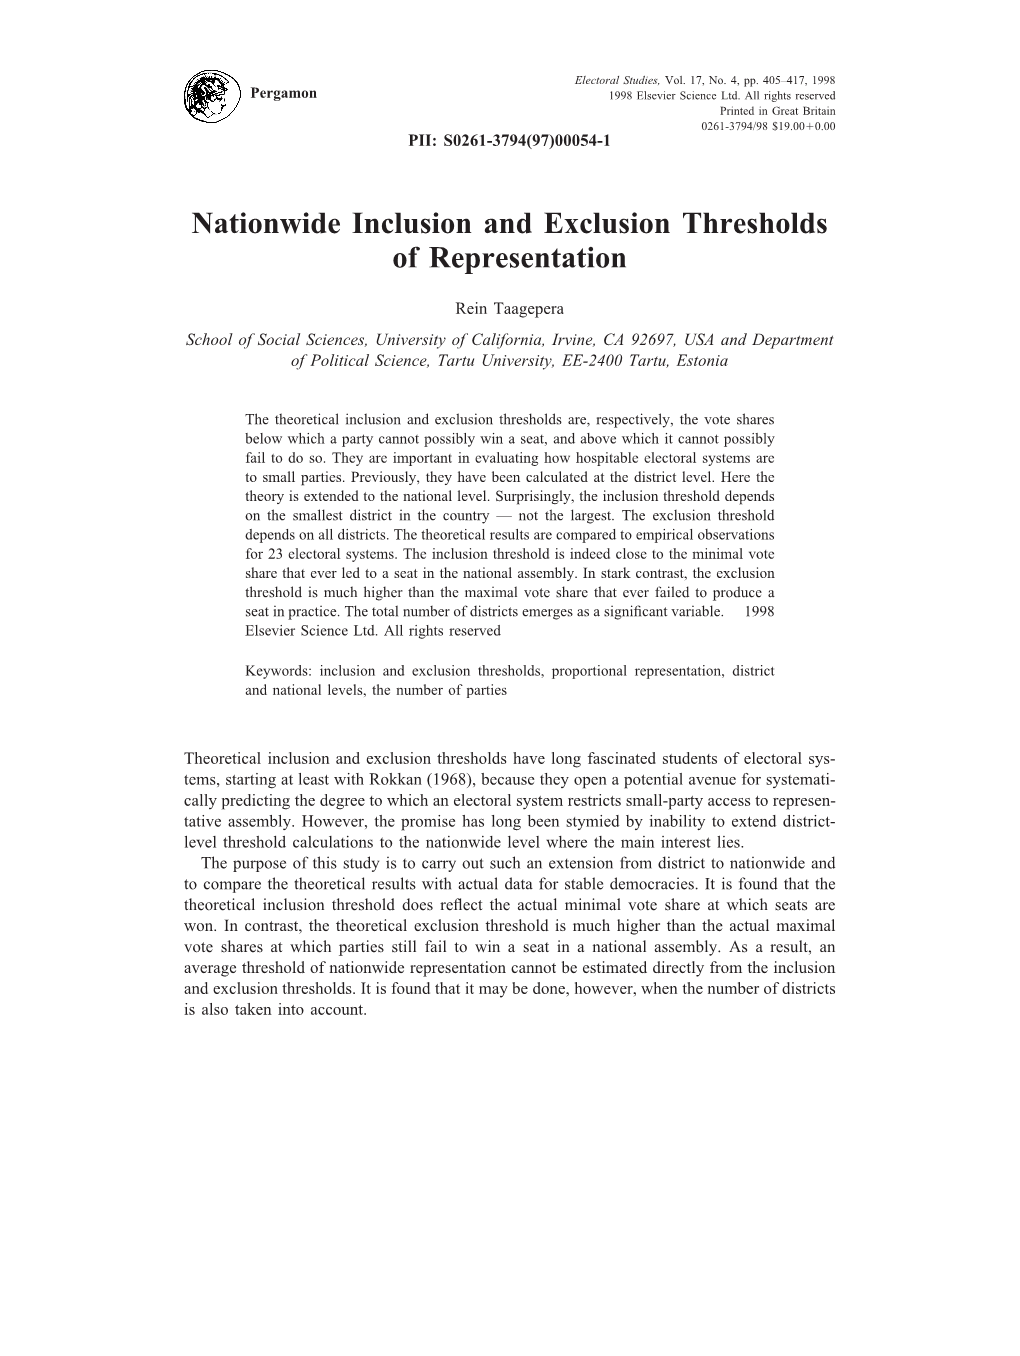 Nationwide Inclusion and Exclusion Thresholds of Representation